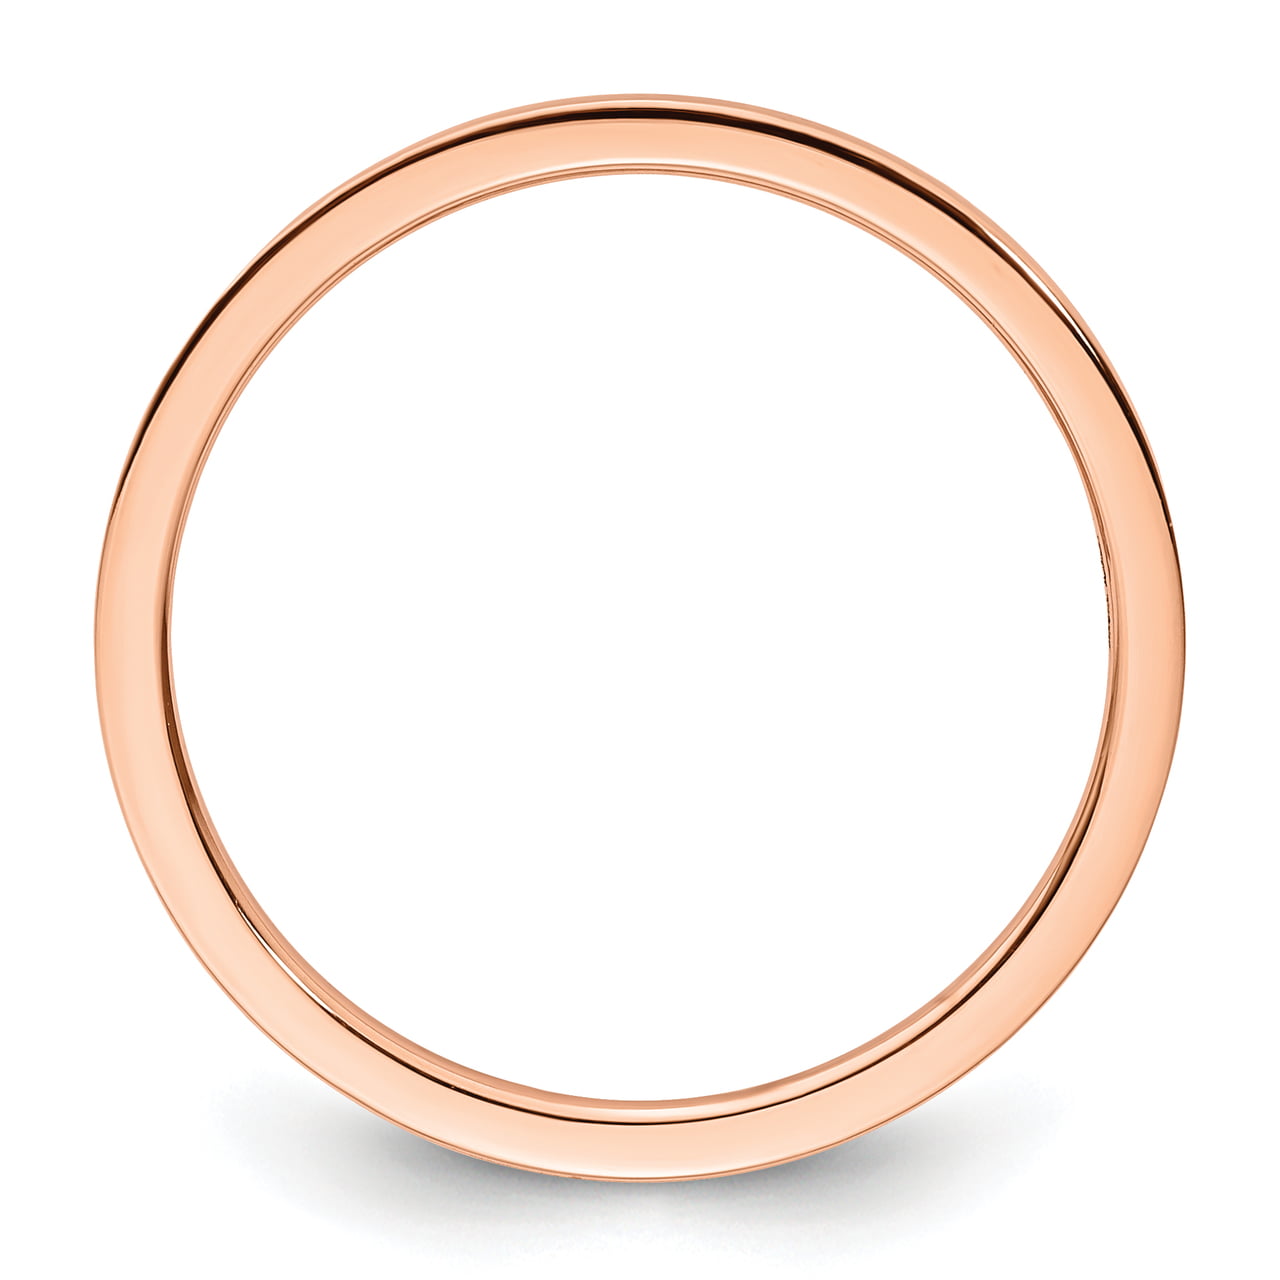 Lex & Lu 10k Rose Gold 1.2mm Flat Stackable Band Ring LAL101